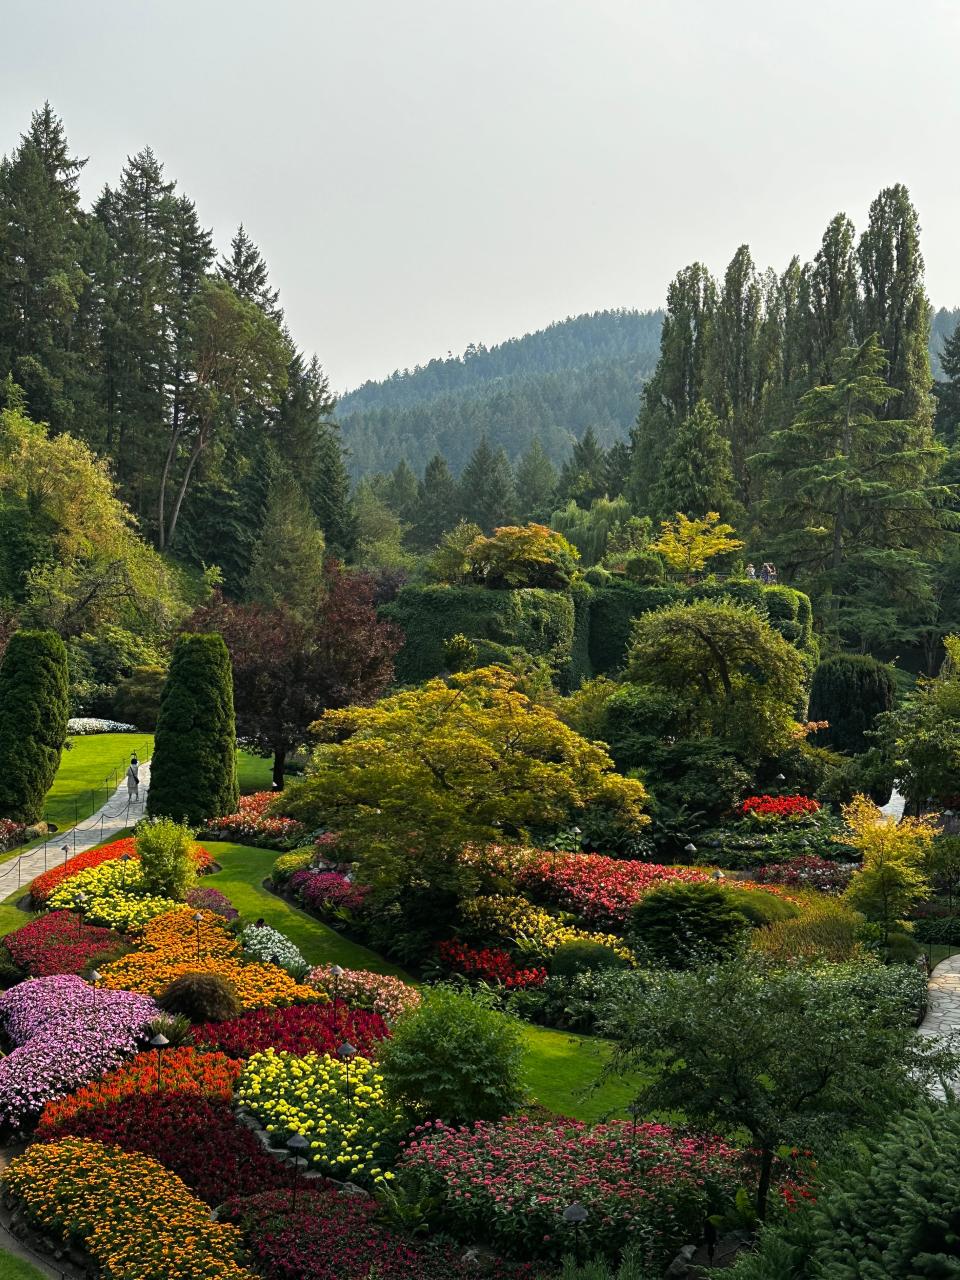 Butchart Gardens, just a half hour outside of Victoria, British Columbia, provides a splendid spot for afternoon tea.